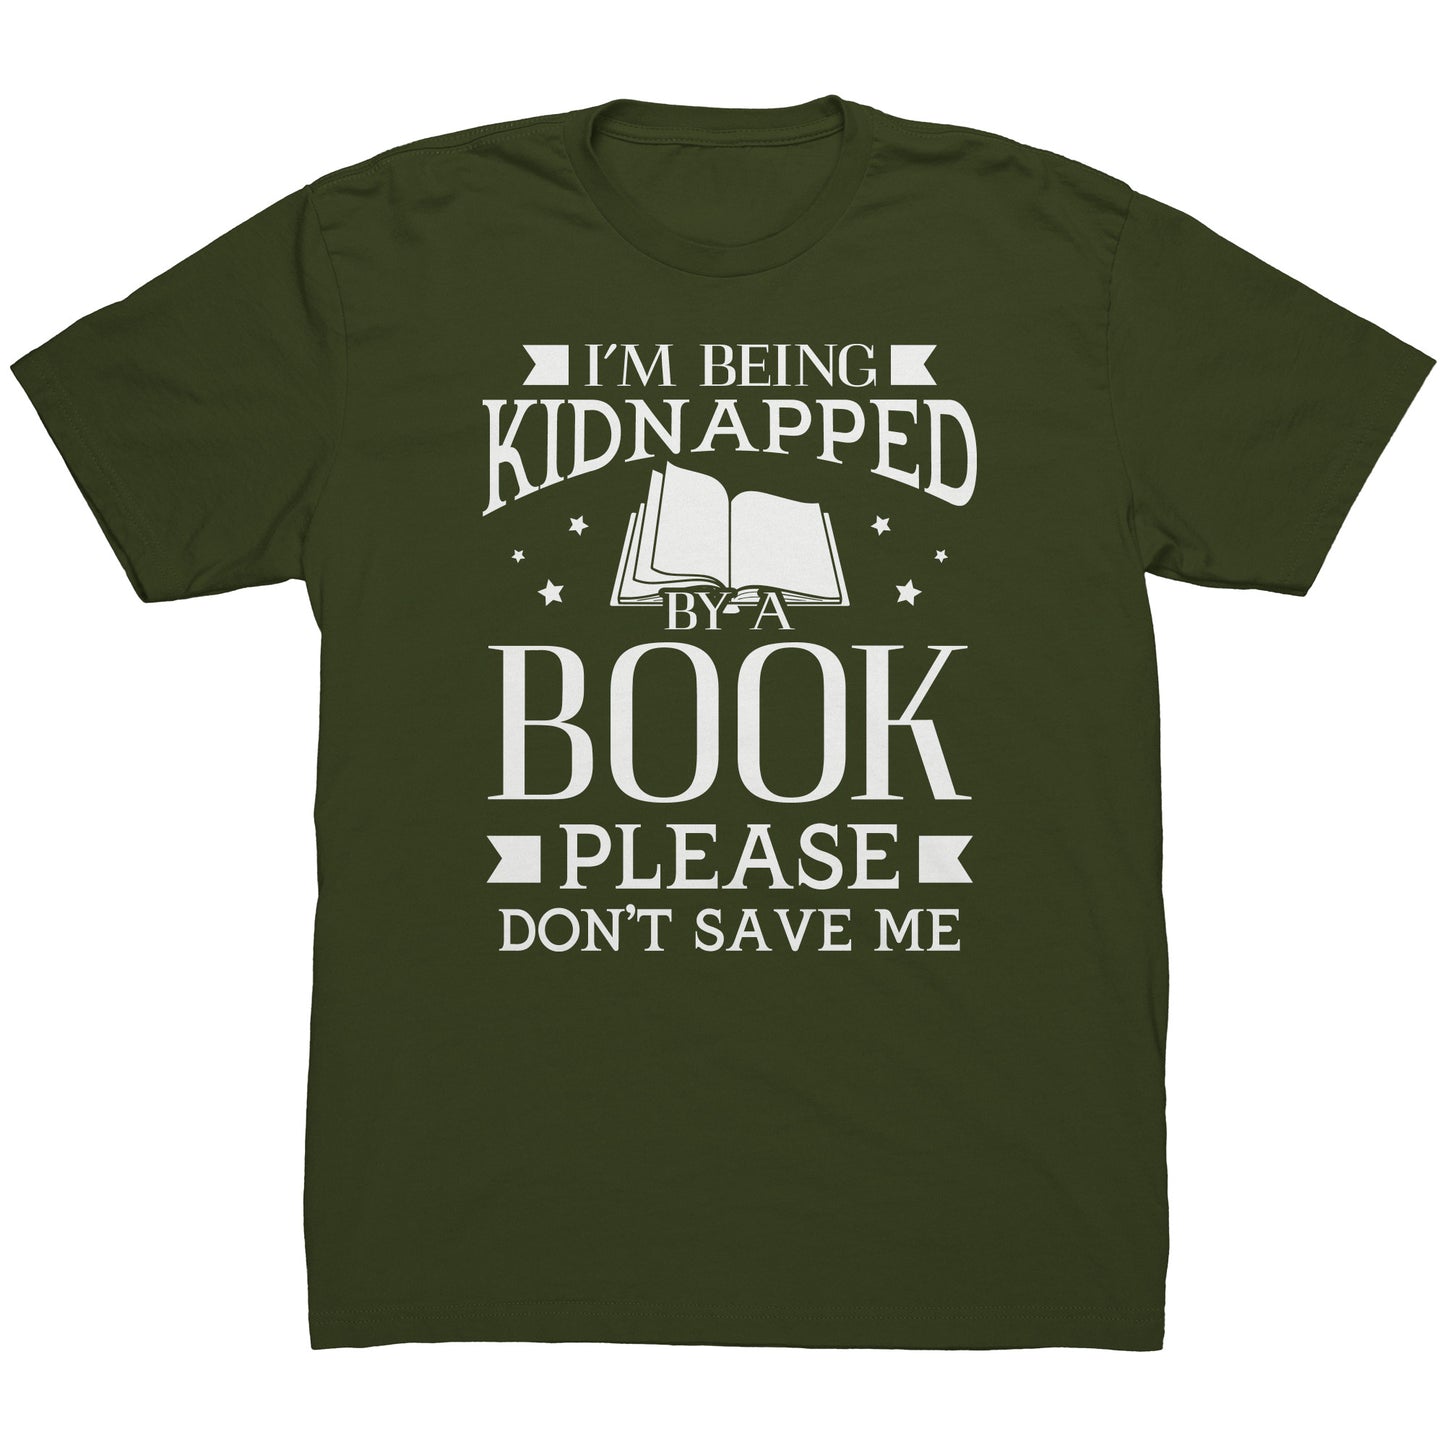 I'm Being Kidnapped By A Book Please Don't Save Me | Men's T-Shirt